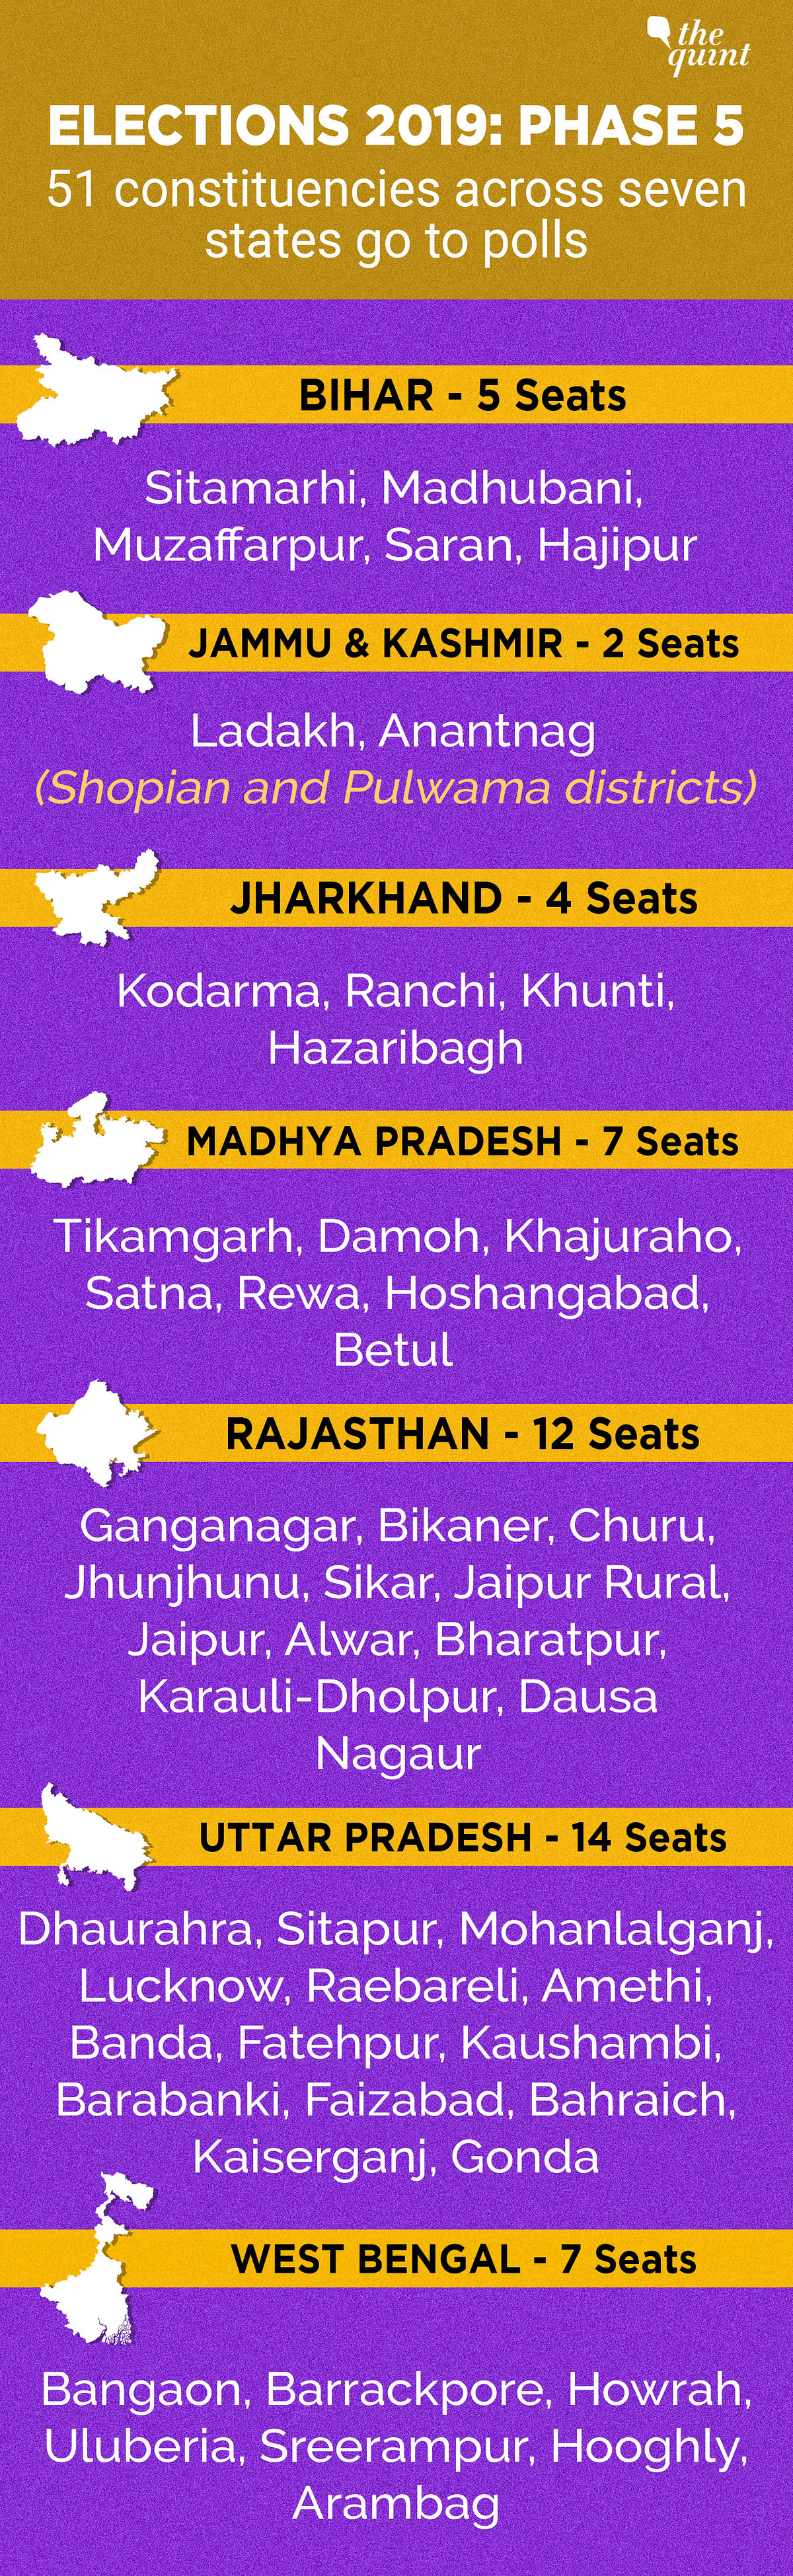 Polling is being held in 51 constituencies spread across seven states.